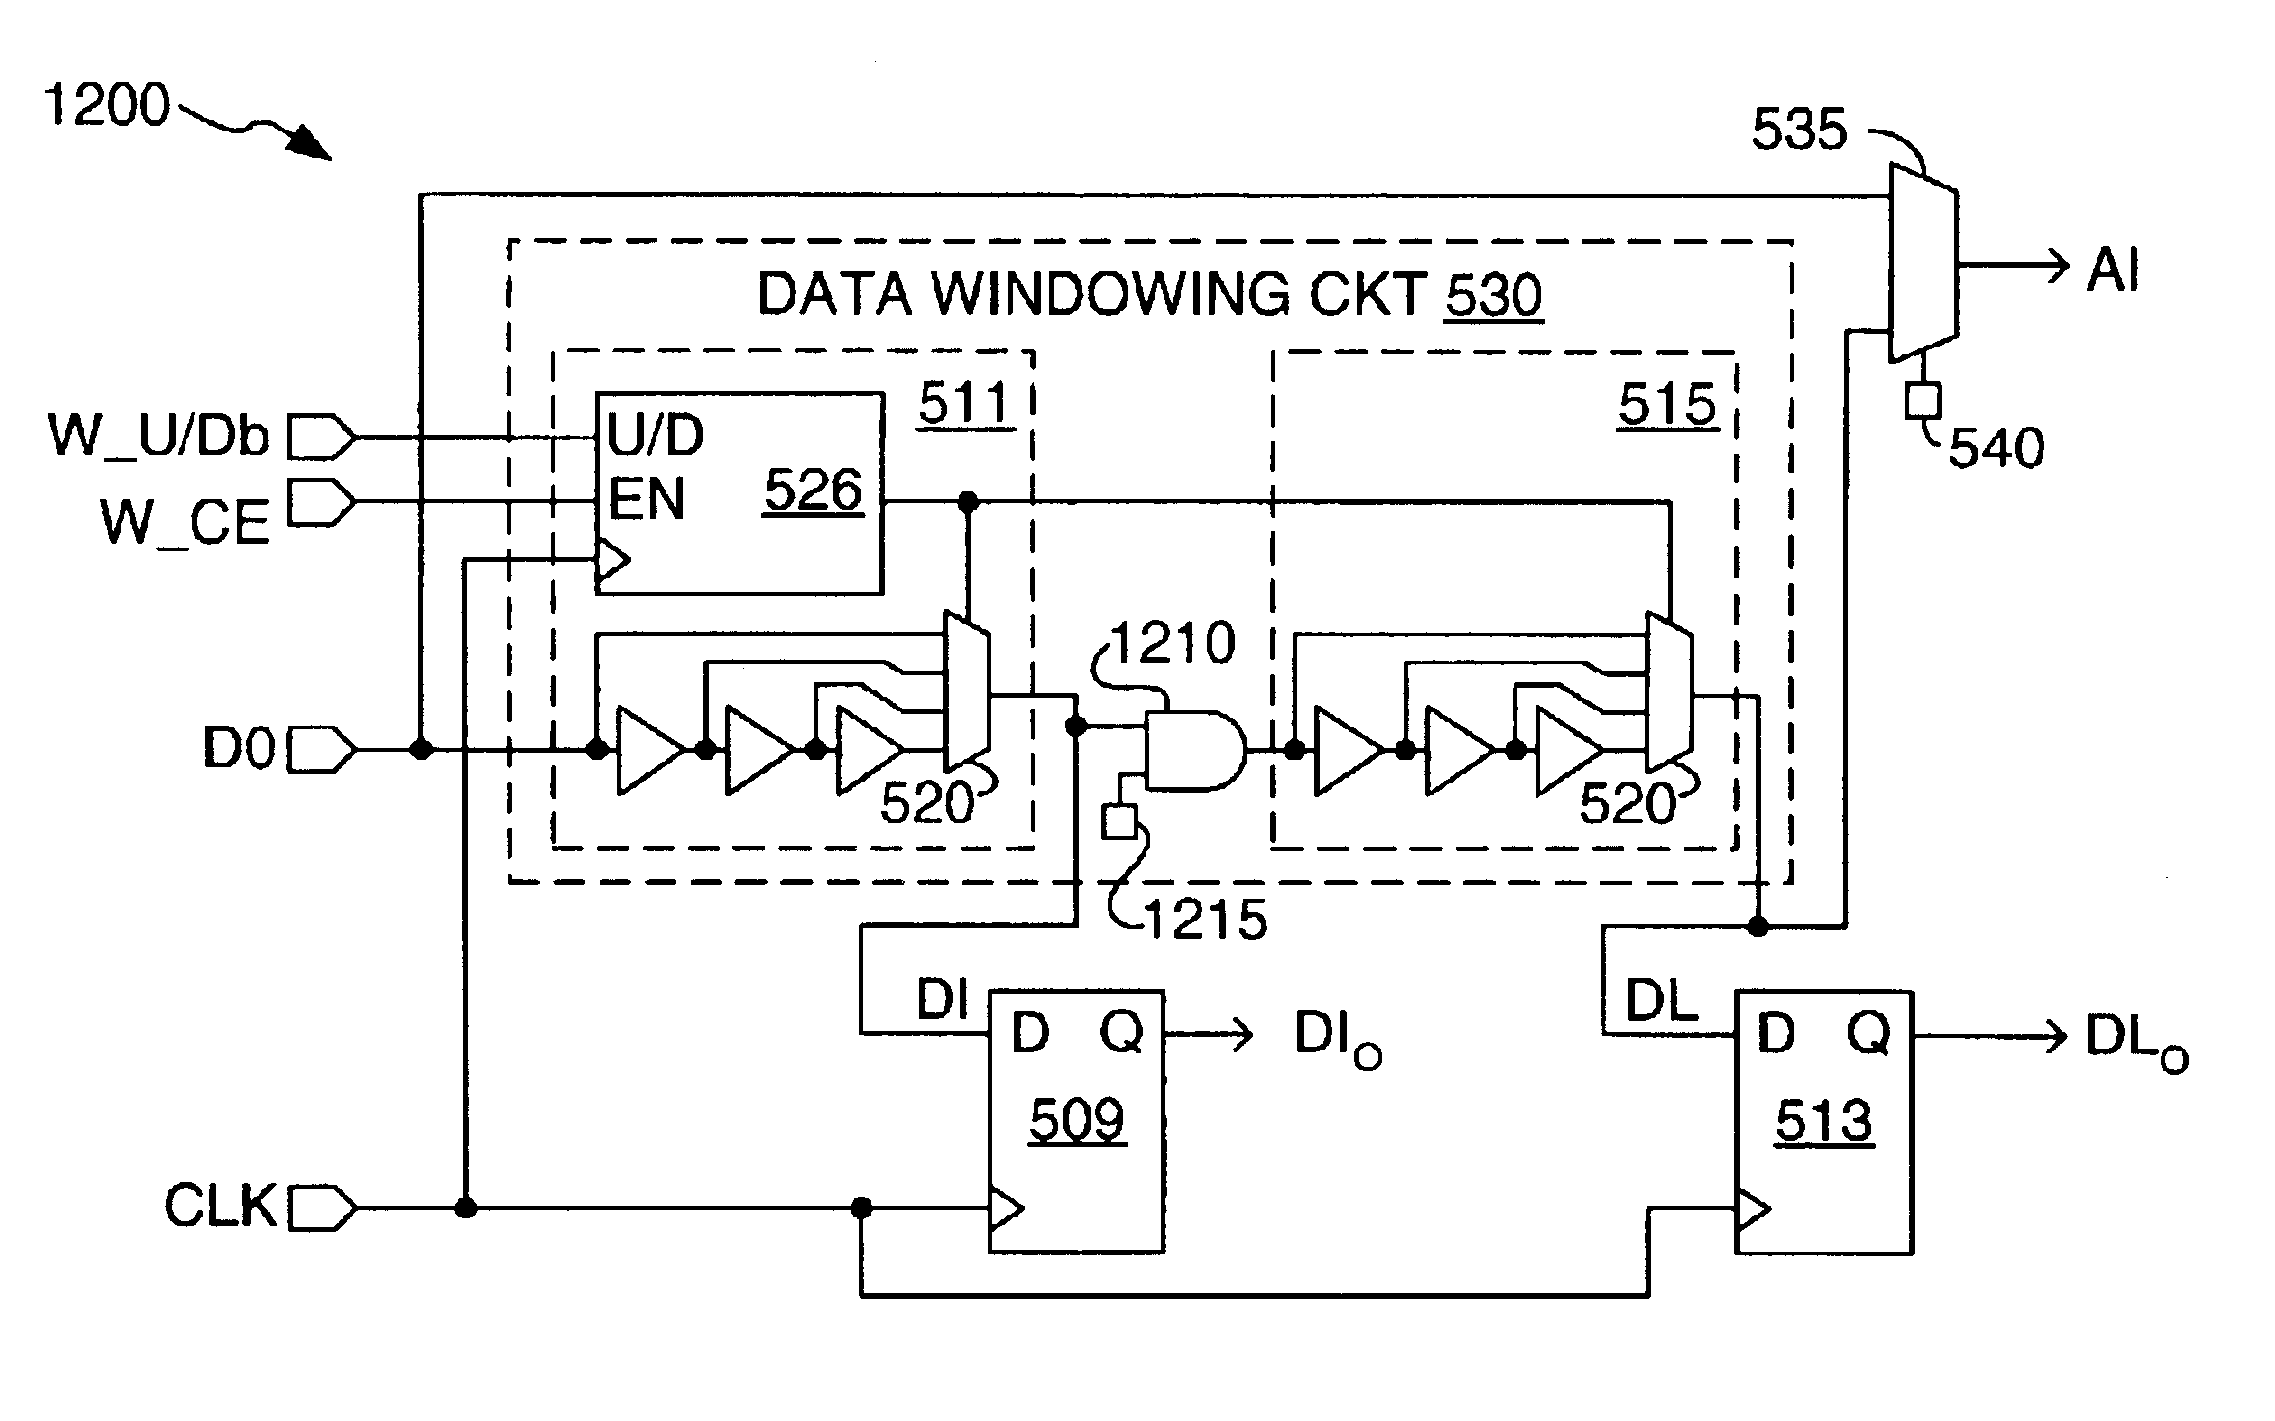 Windowing circuit for aligning data and clock signals